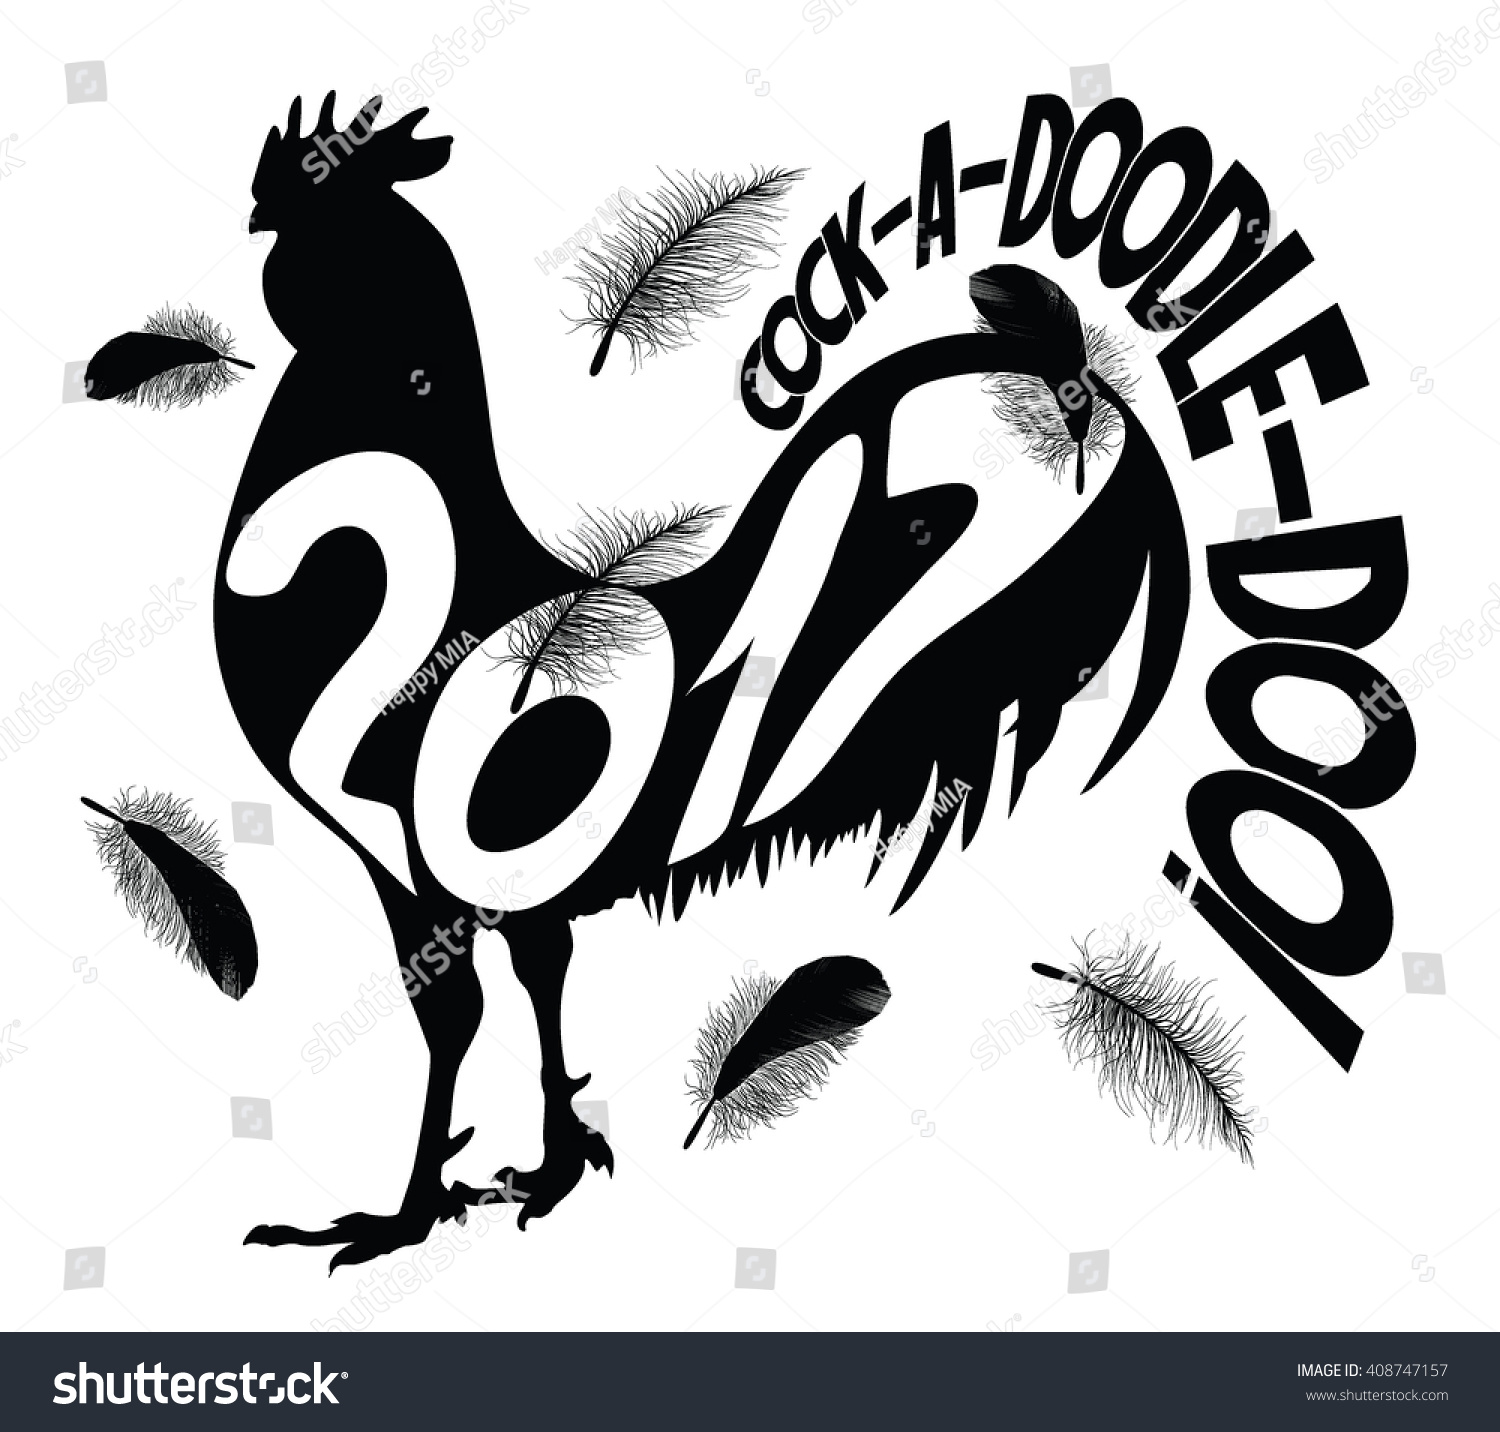 SVG of 2017 New Year vector illustration with silhouette of rooster ,cock-a-doodle-doo! lettering and  black feathers svg